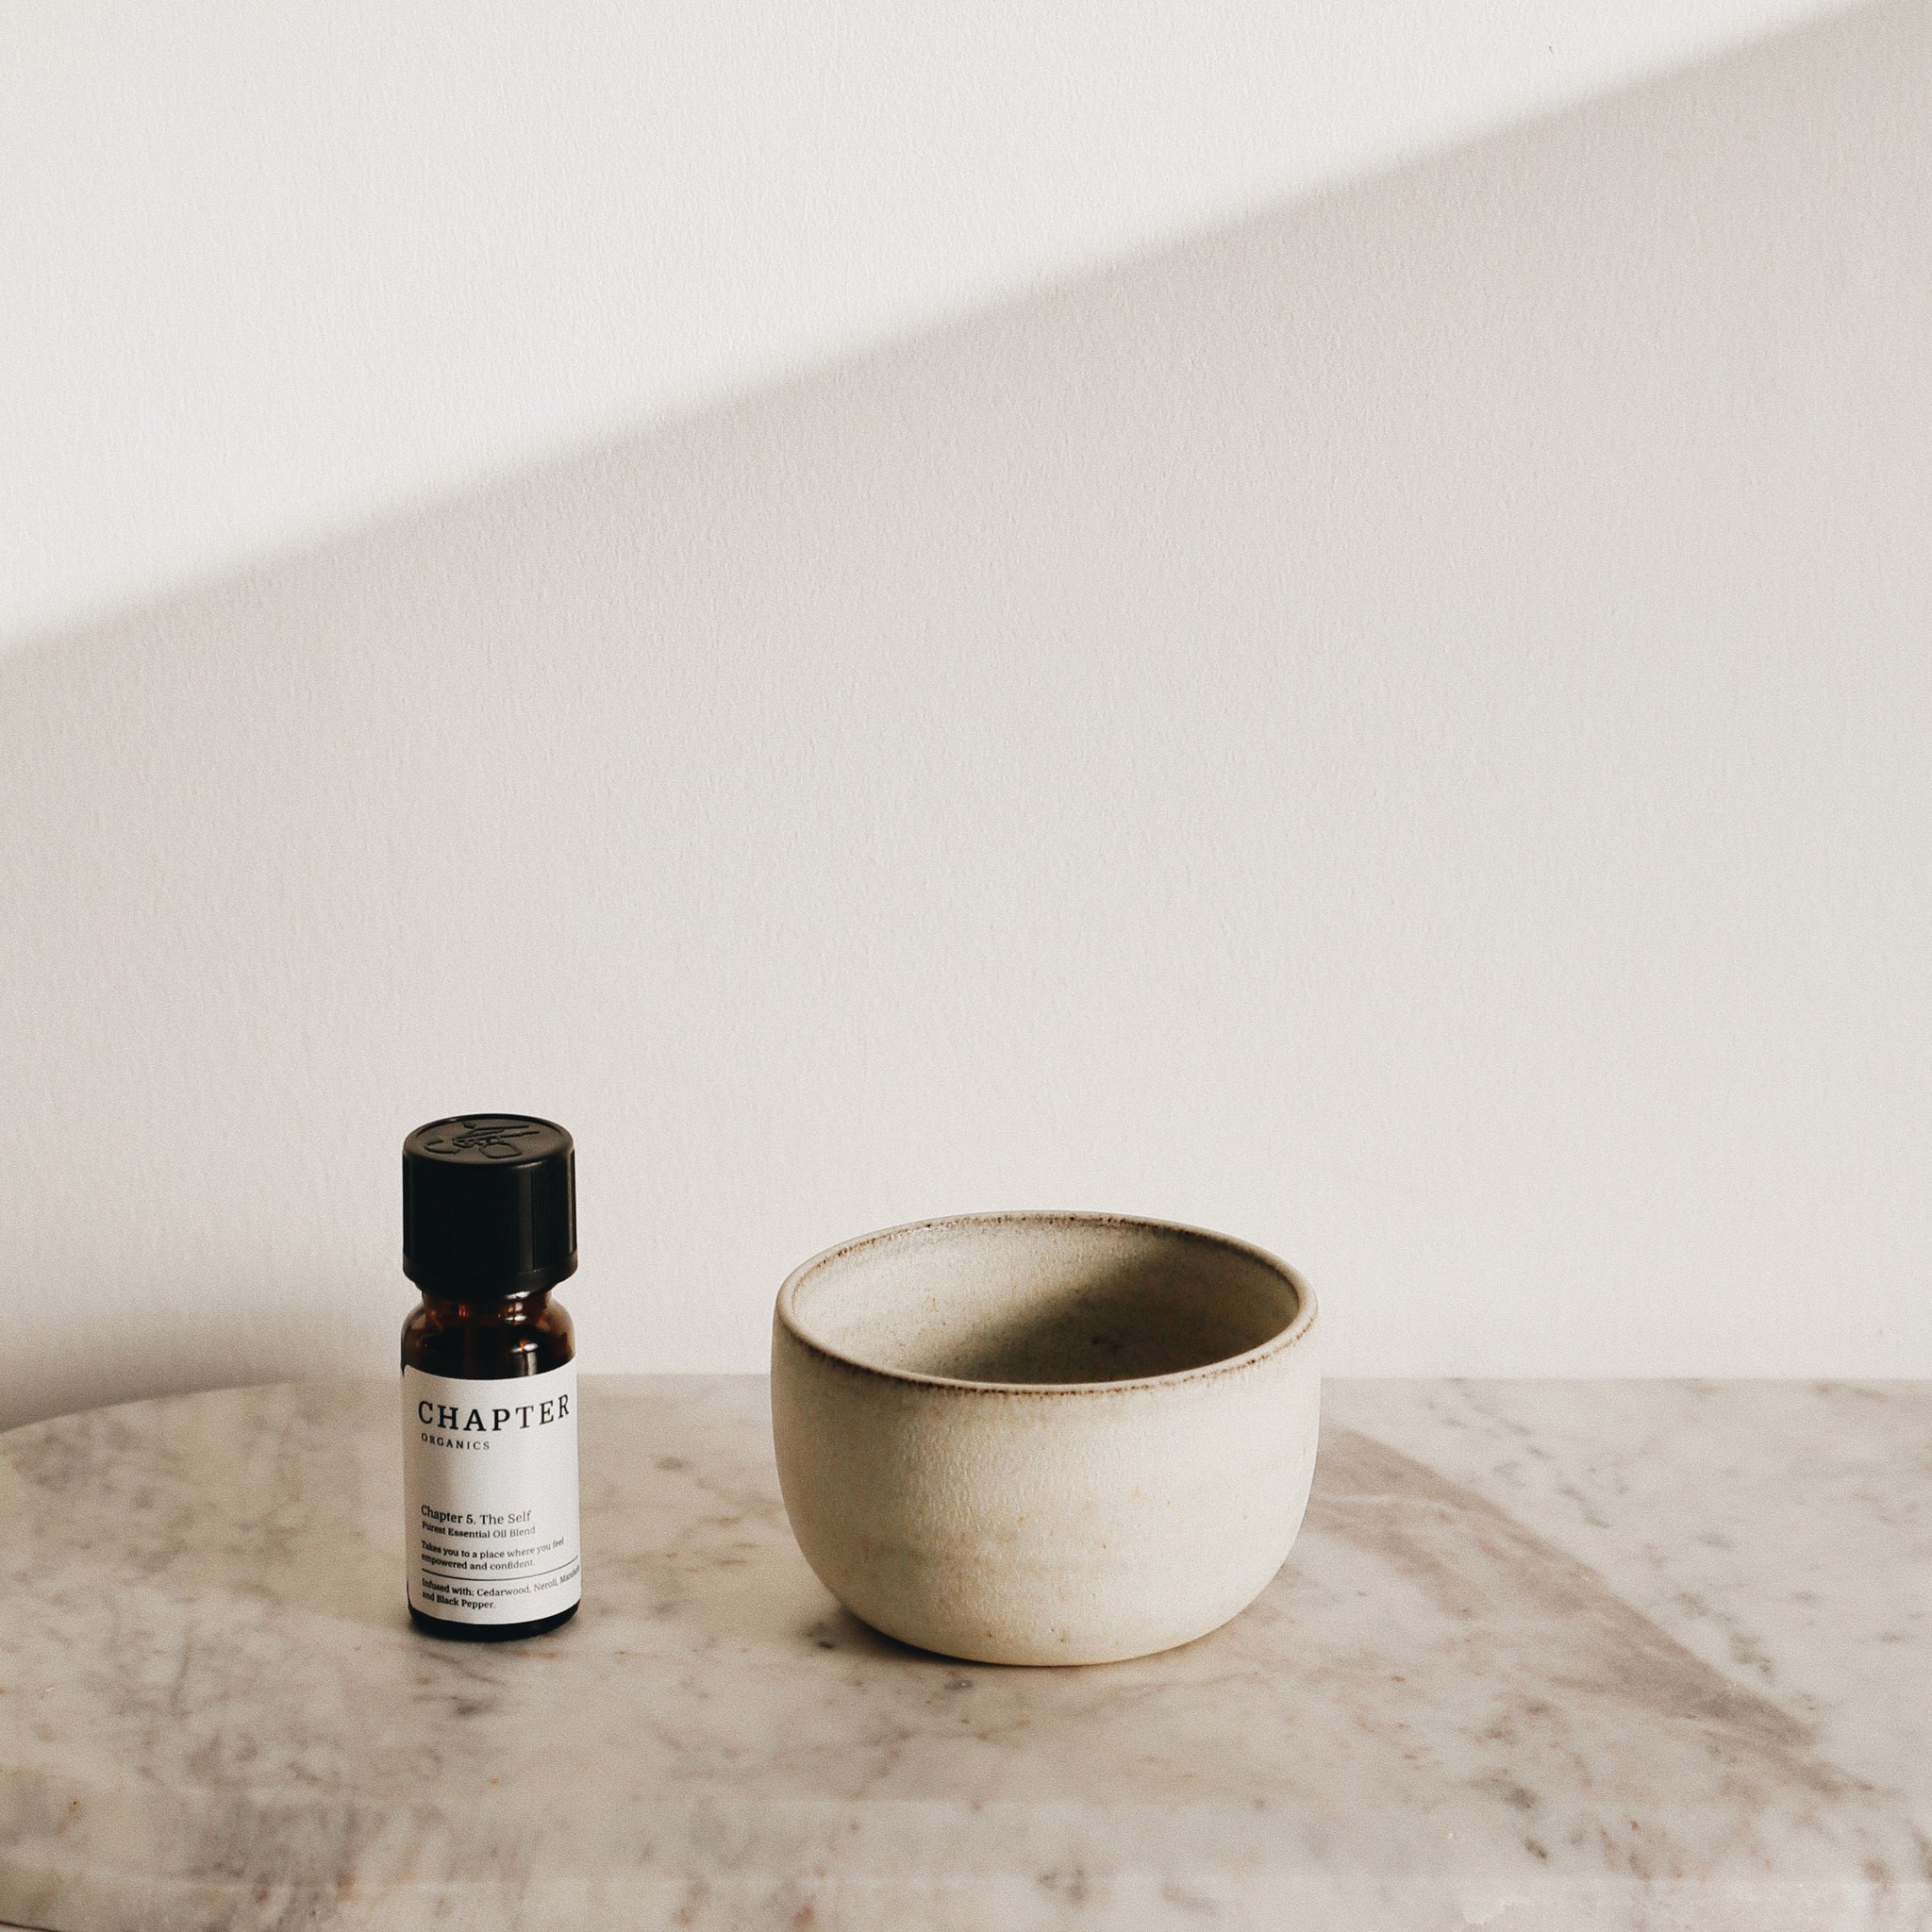 The Clarity Purest Essential Oil Blend